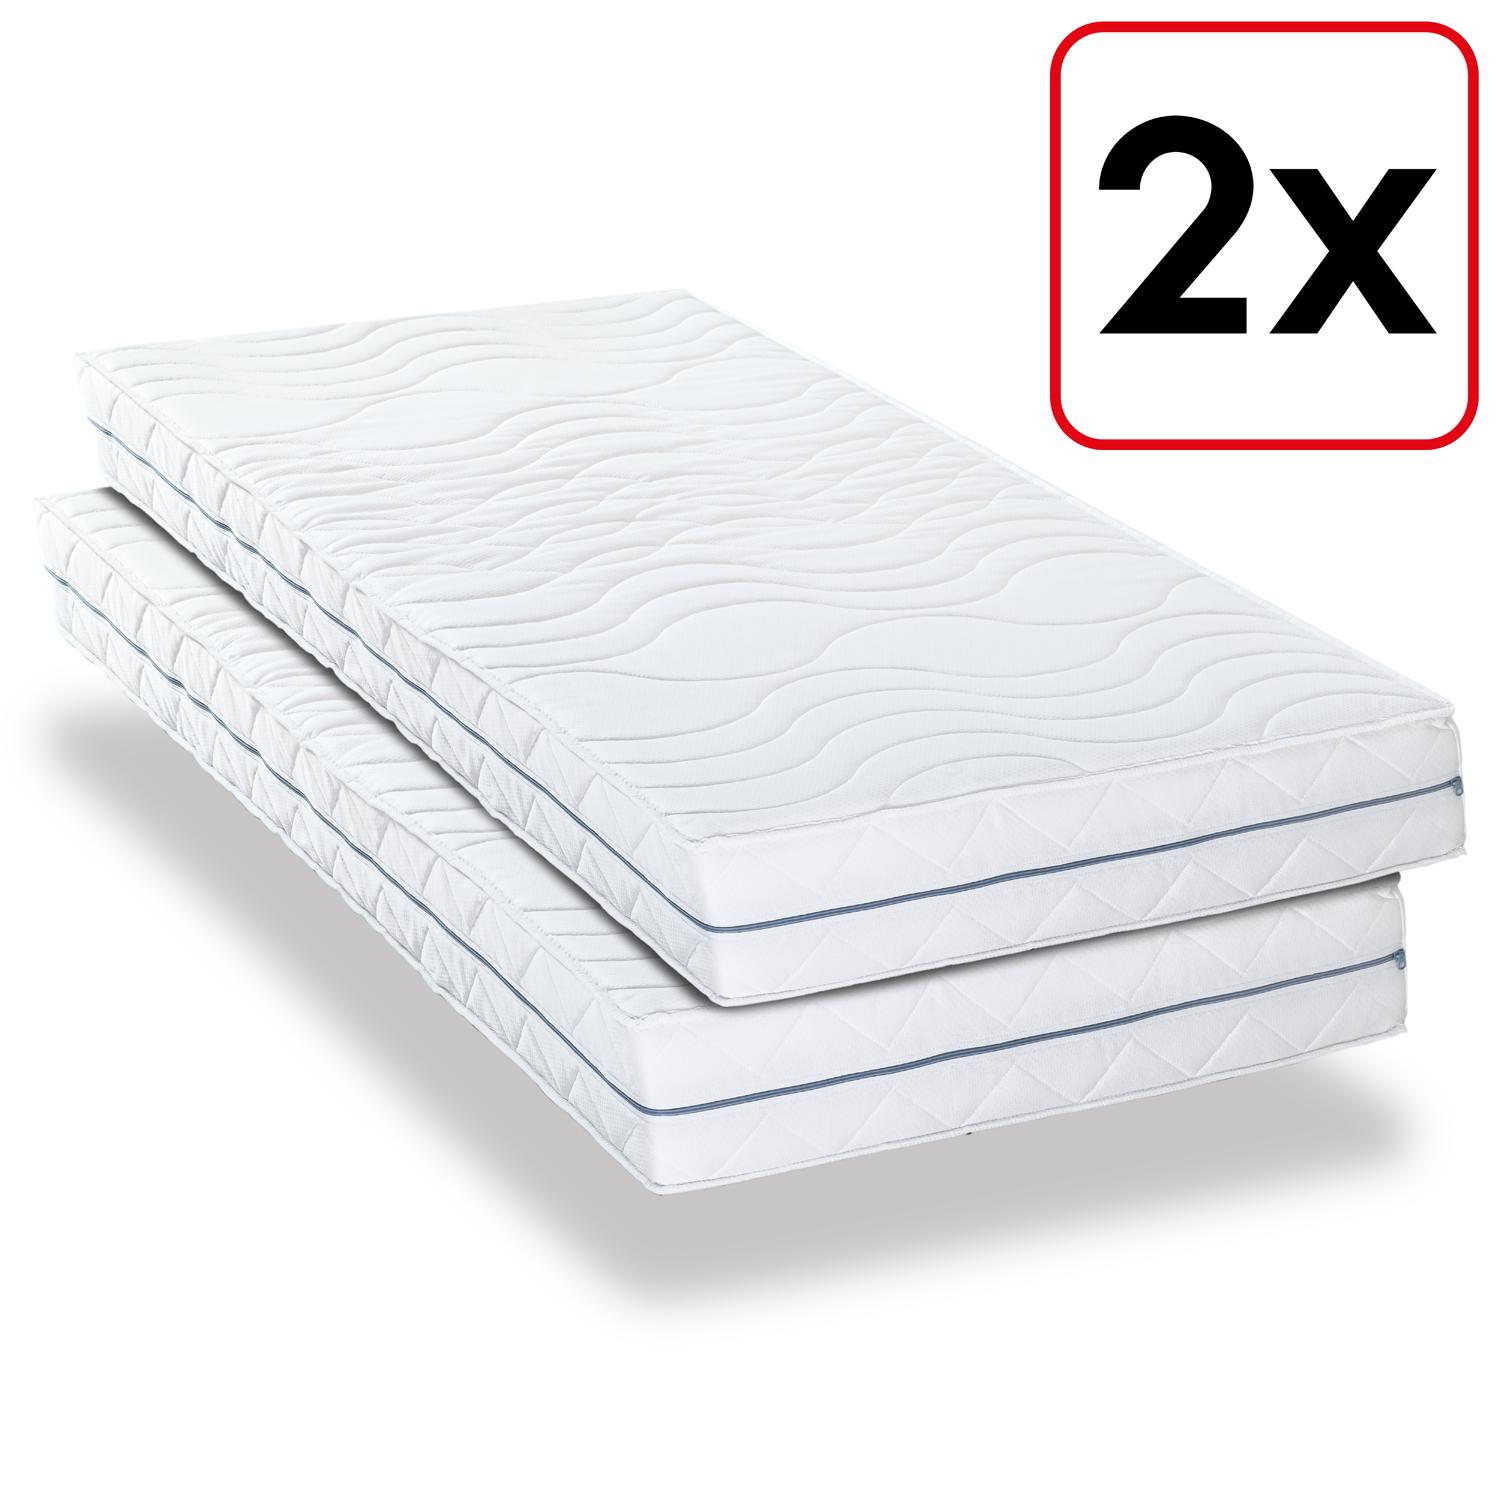 Double pack orthopaedic mattress 90x200 cm 7-zone Supportho Premium, height 18 cm, firmness level H2/H3, twin set